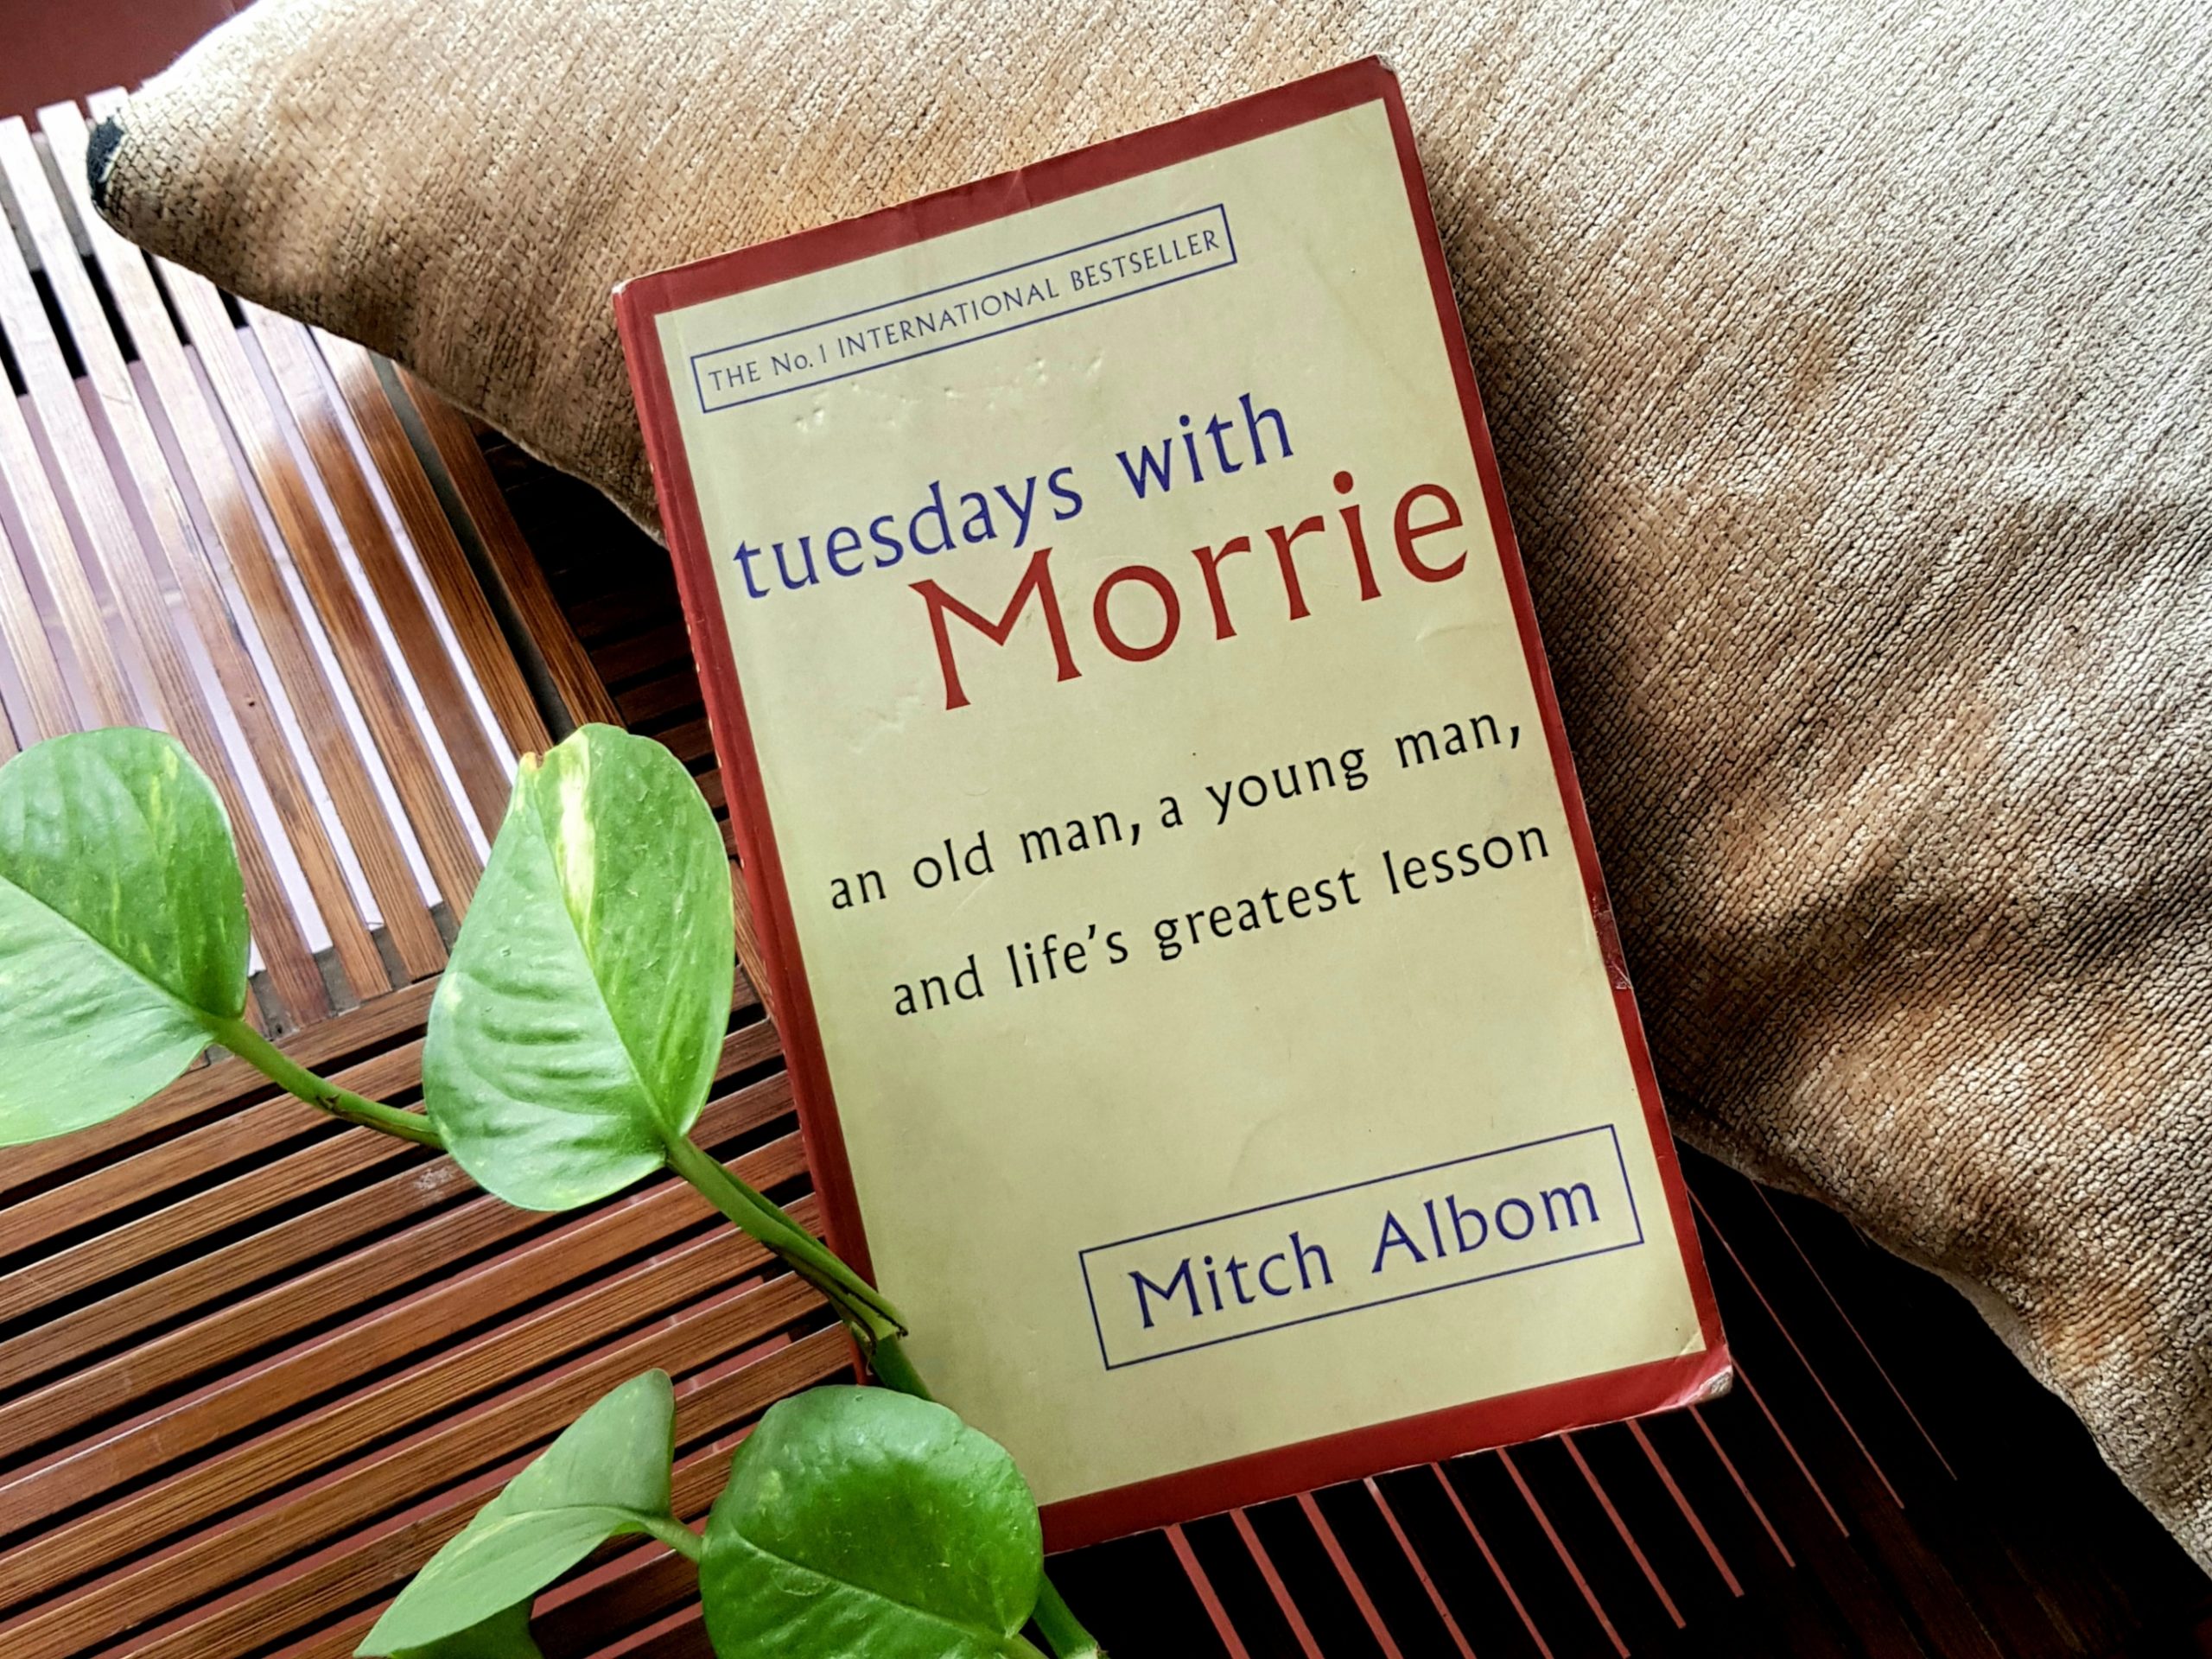 tuesdays with morrie online book